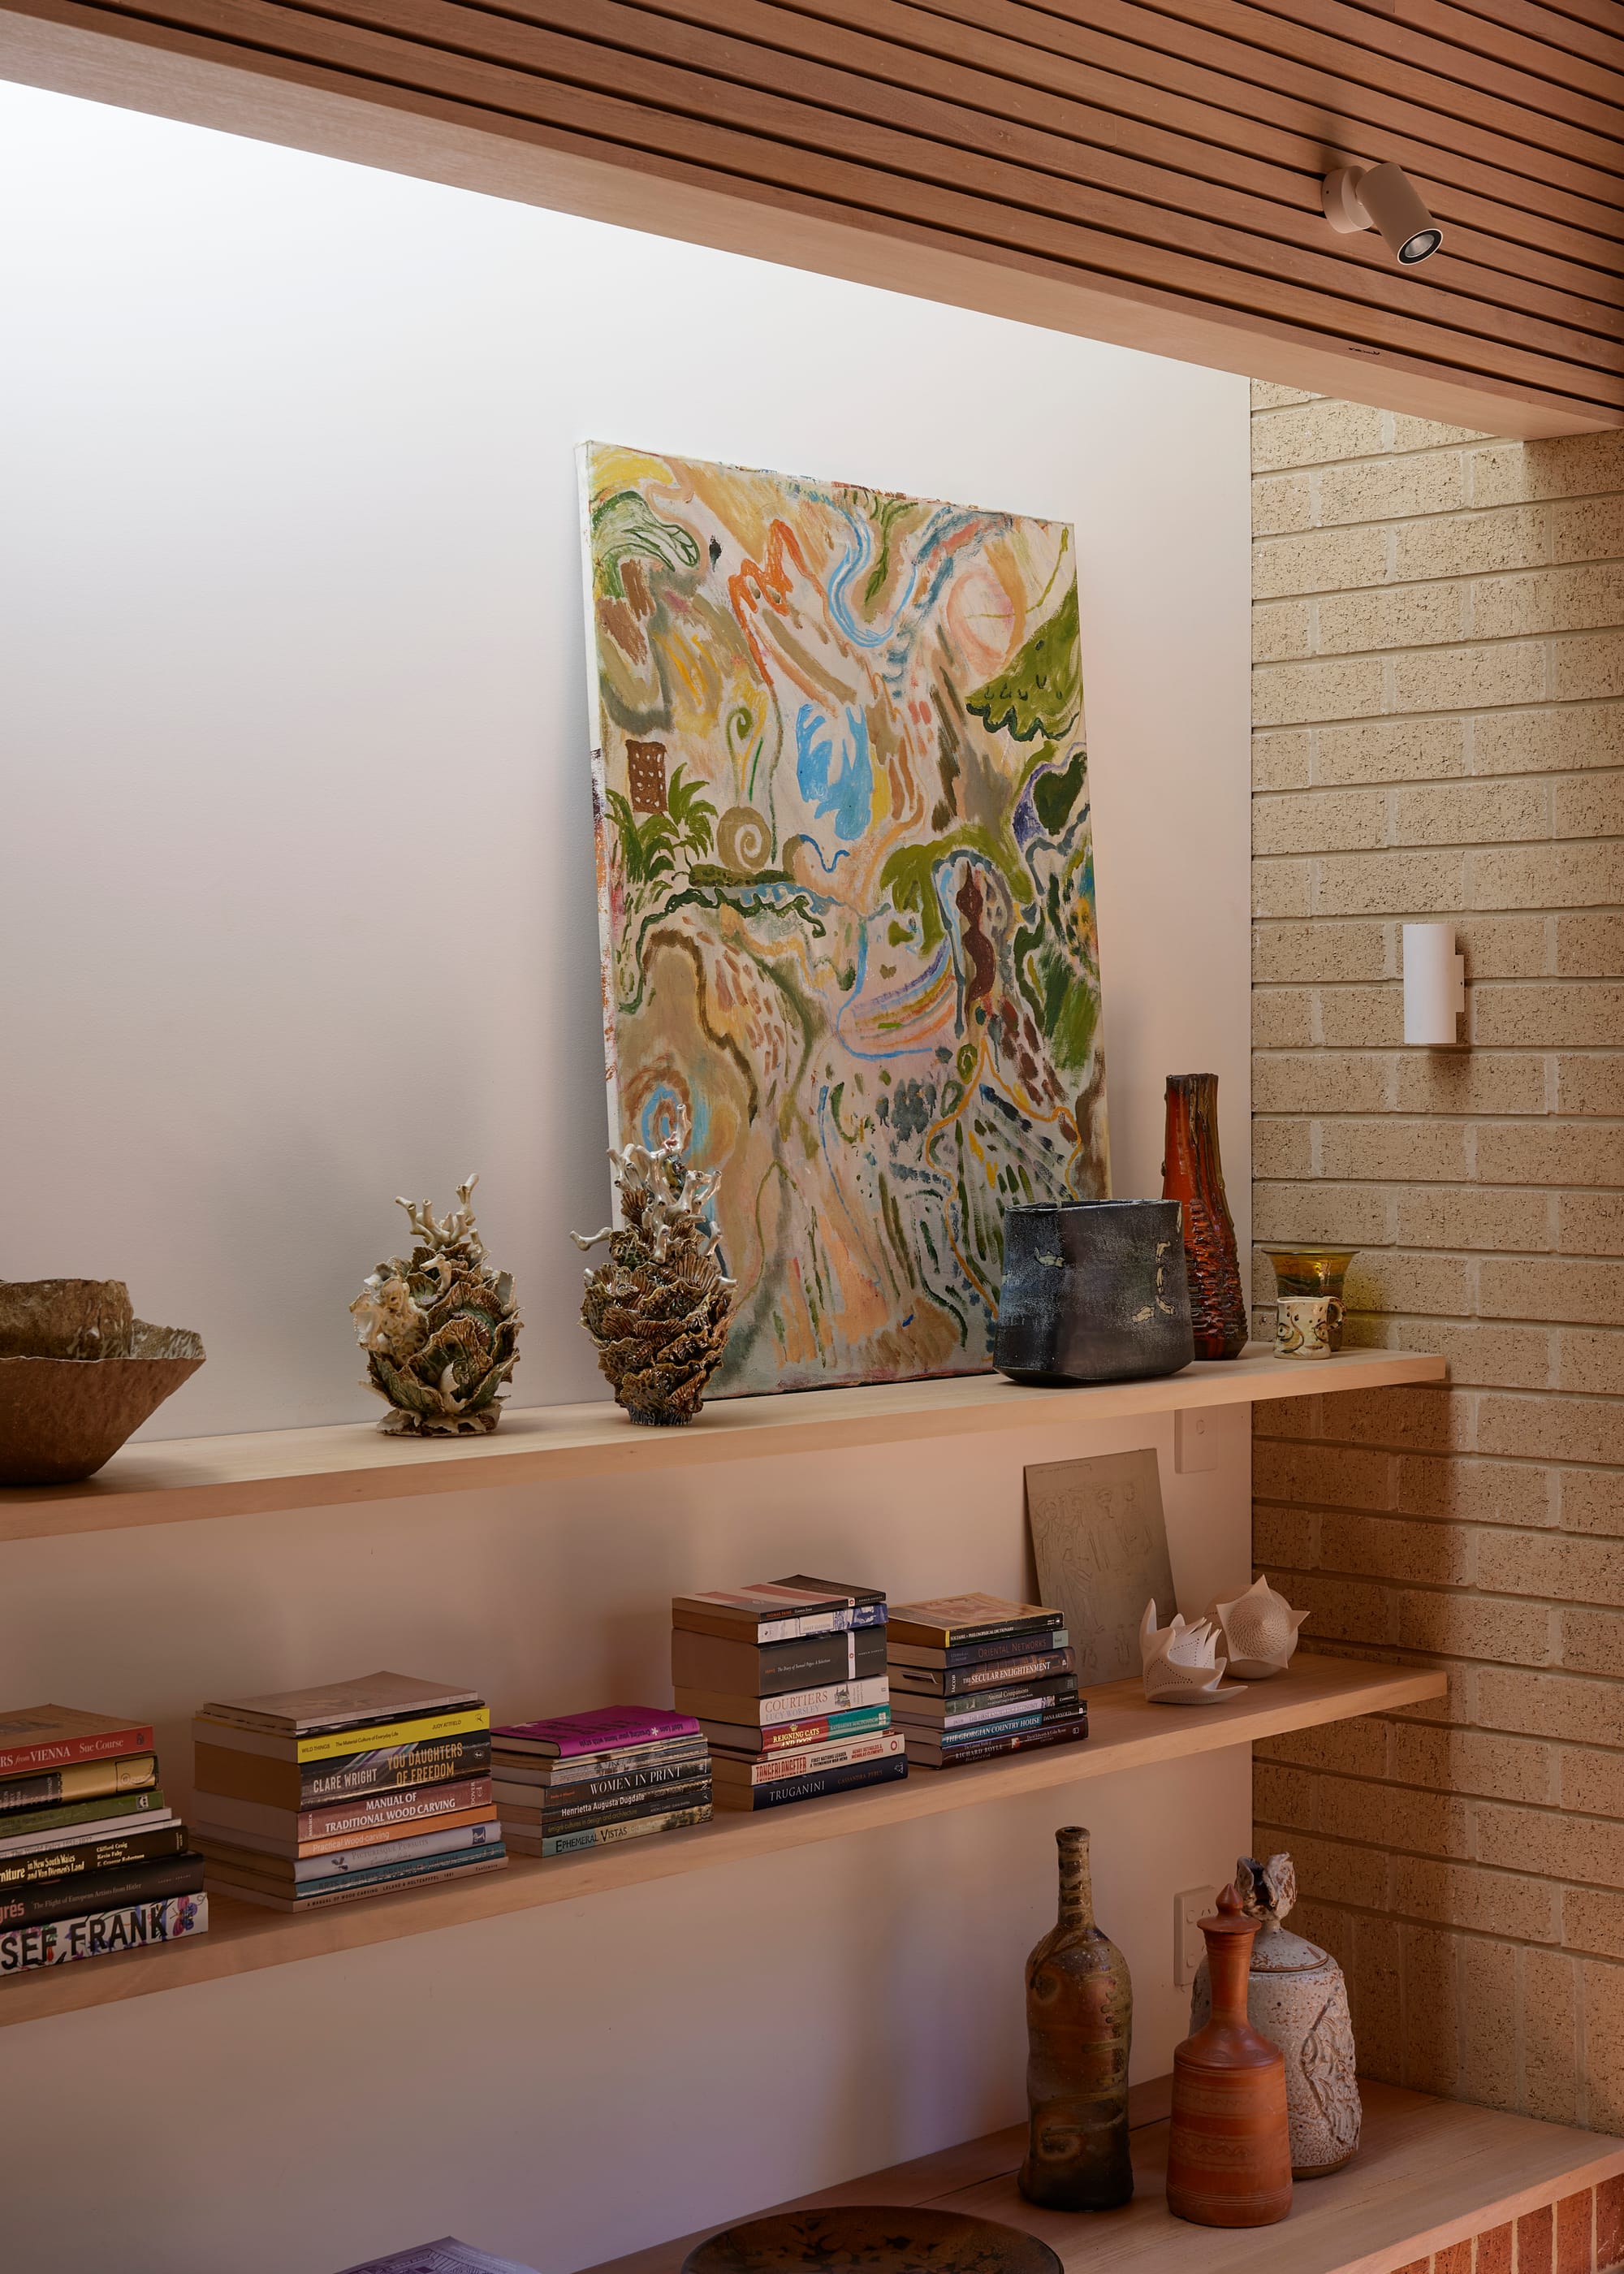 Harriet's House by SO:Architecture. Photography by Sean Fennessy. Floating oak shelves in front of brick wall. Abstract art and lots of books displayed.